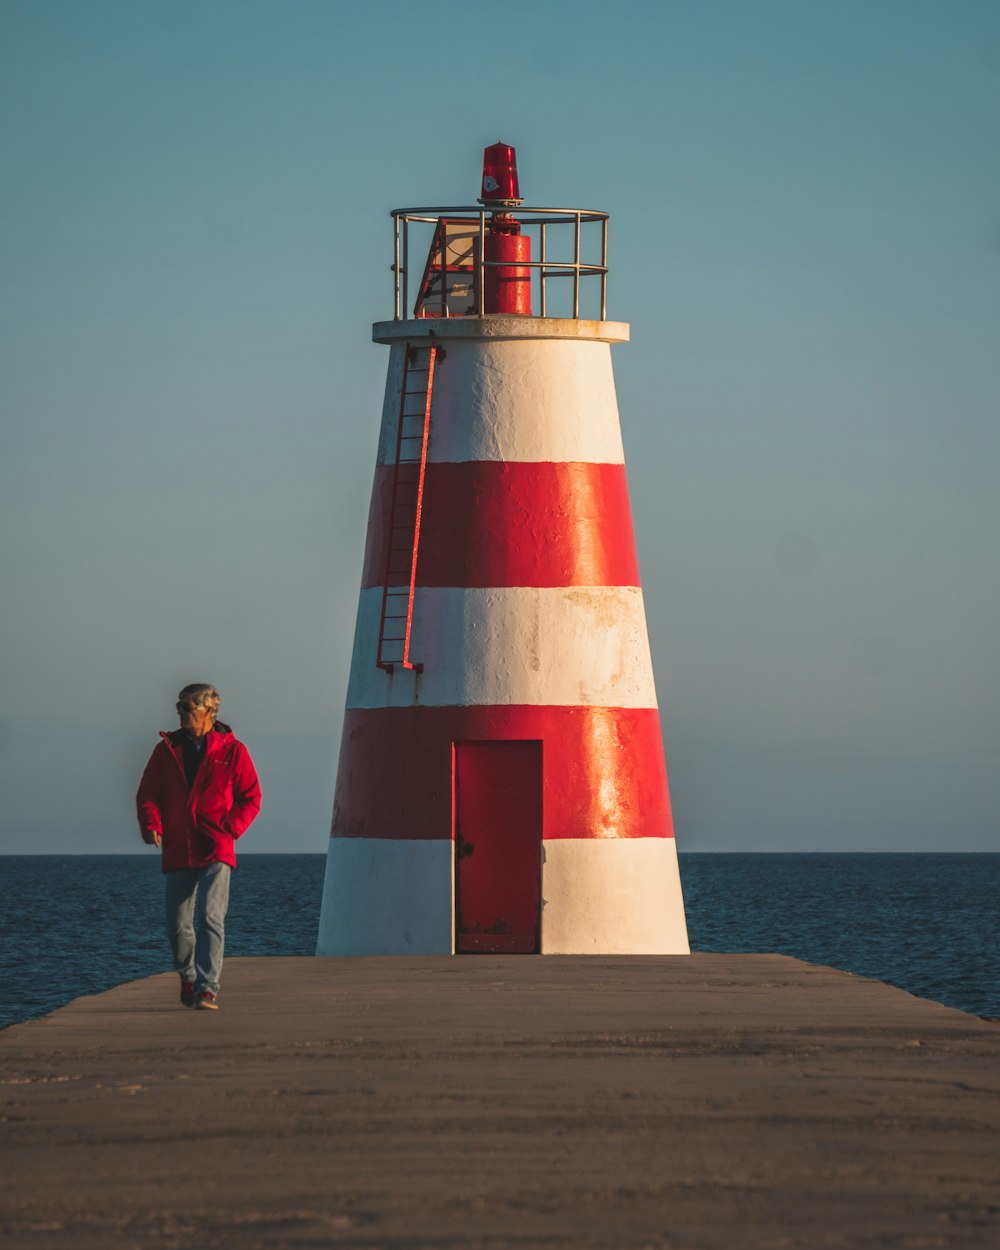 a person standing next to a red and white lighthouse